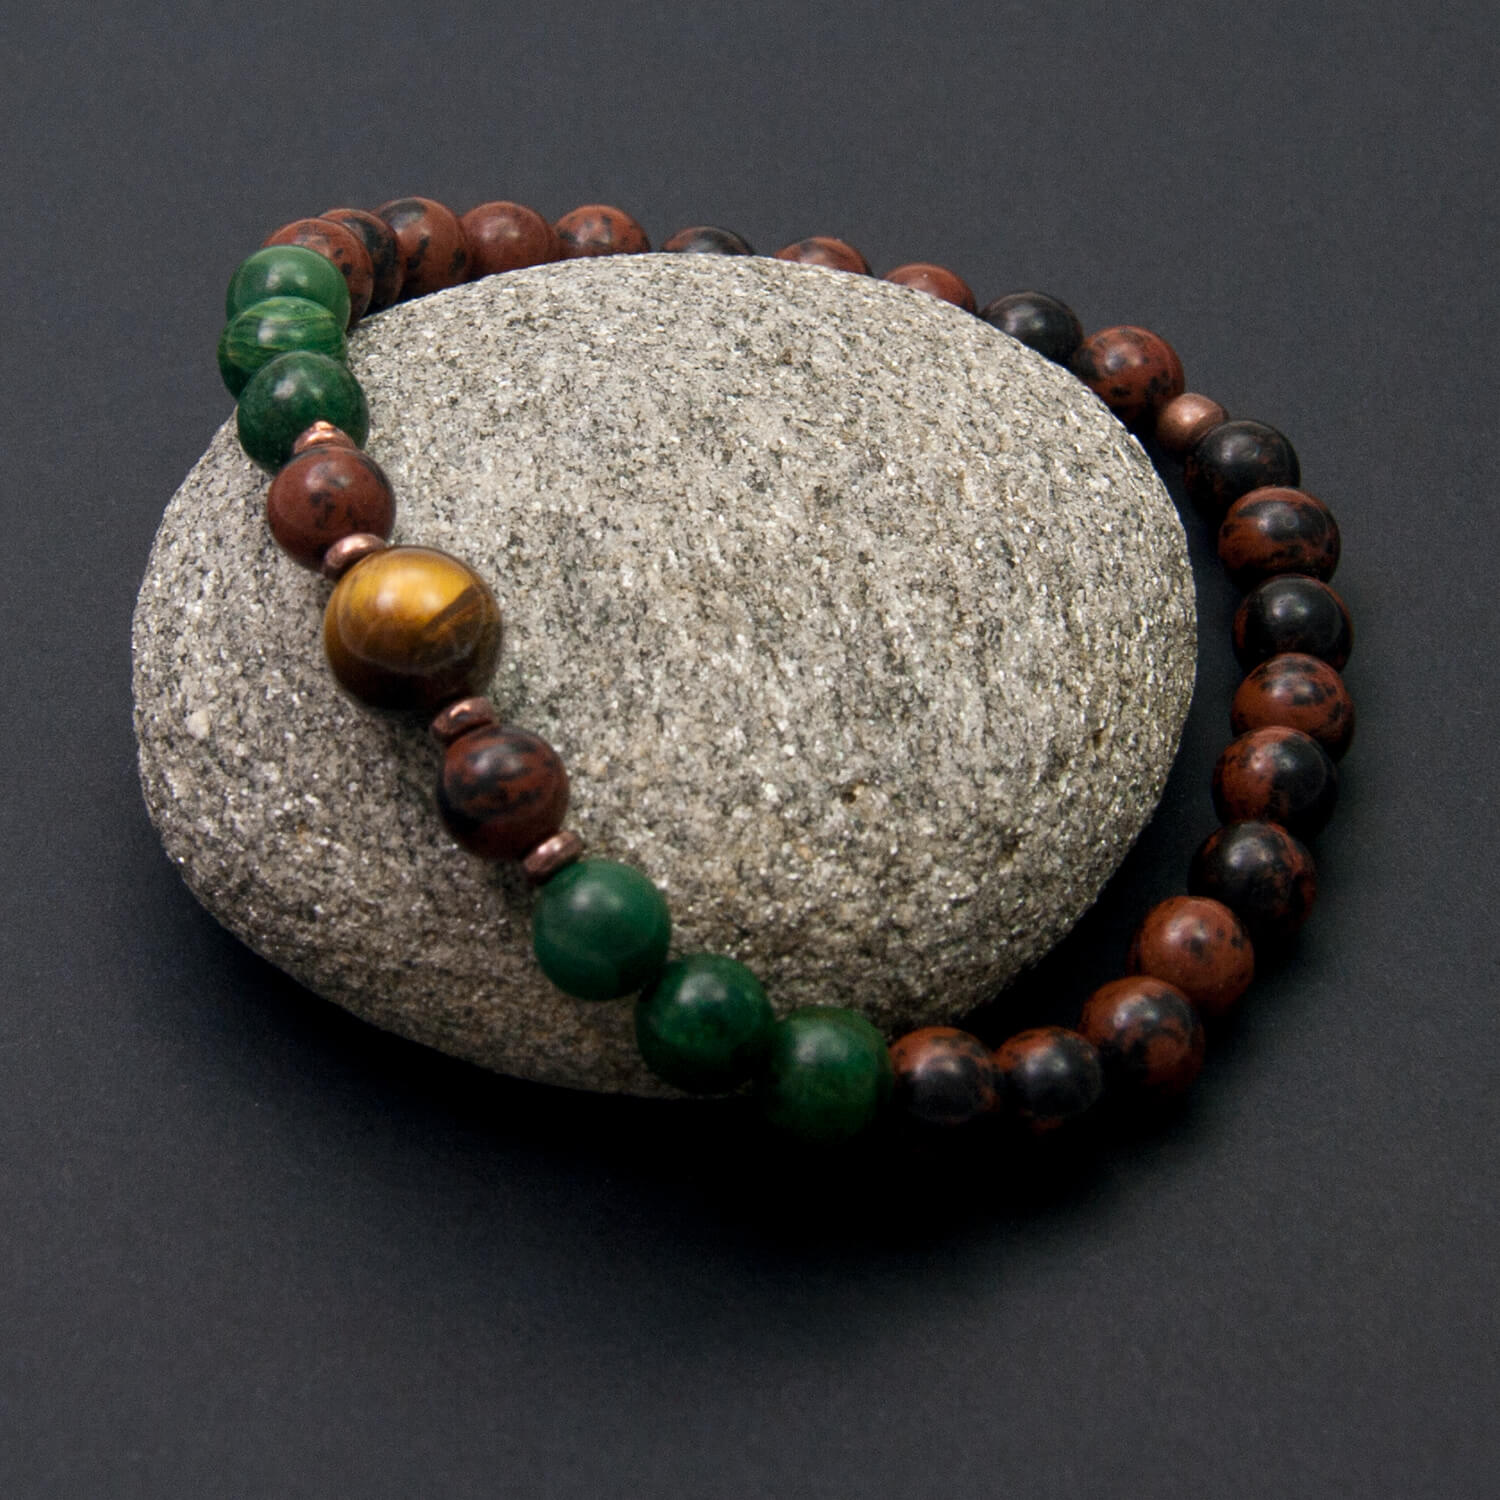 Mahogany Obsidian Bracelet with African Jade and Tiger Eye